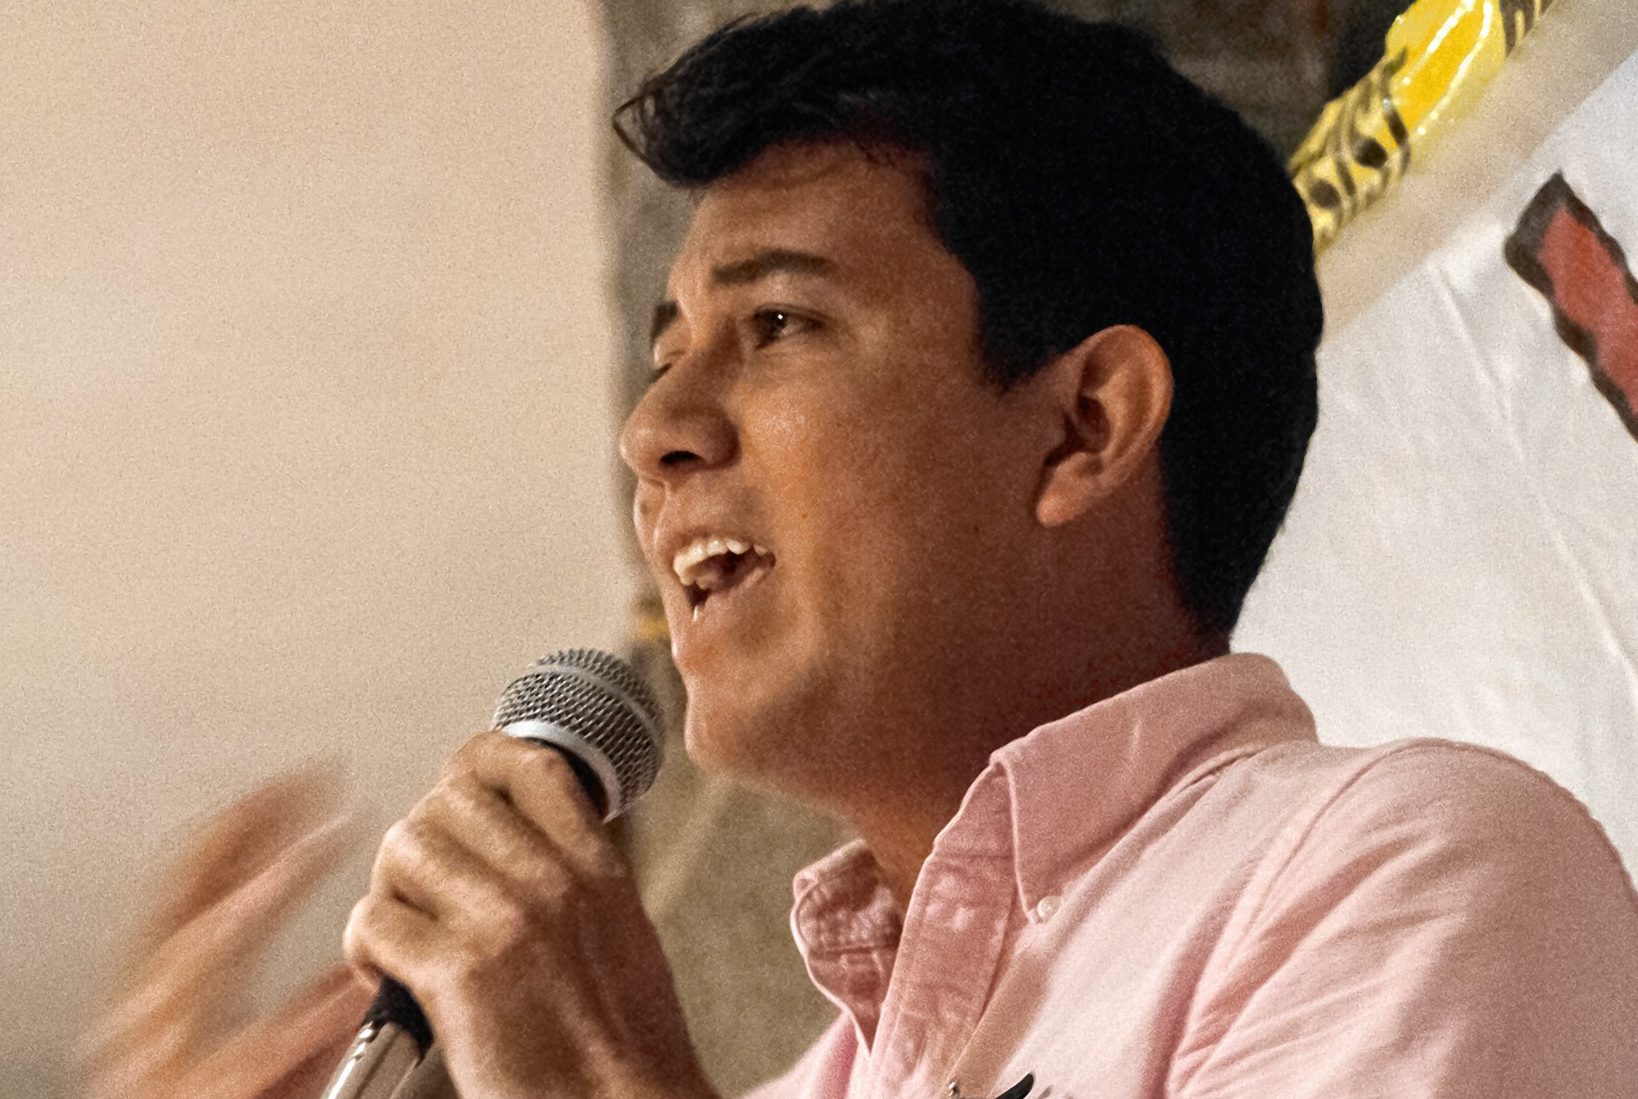 Deported Valley activist Eduardo Samaniego says he has appealed his deportation